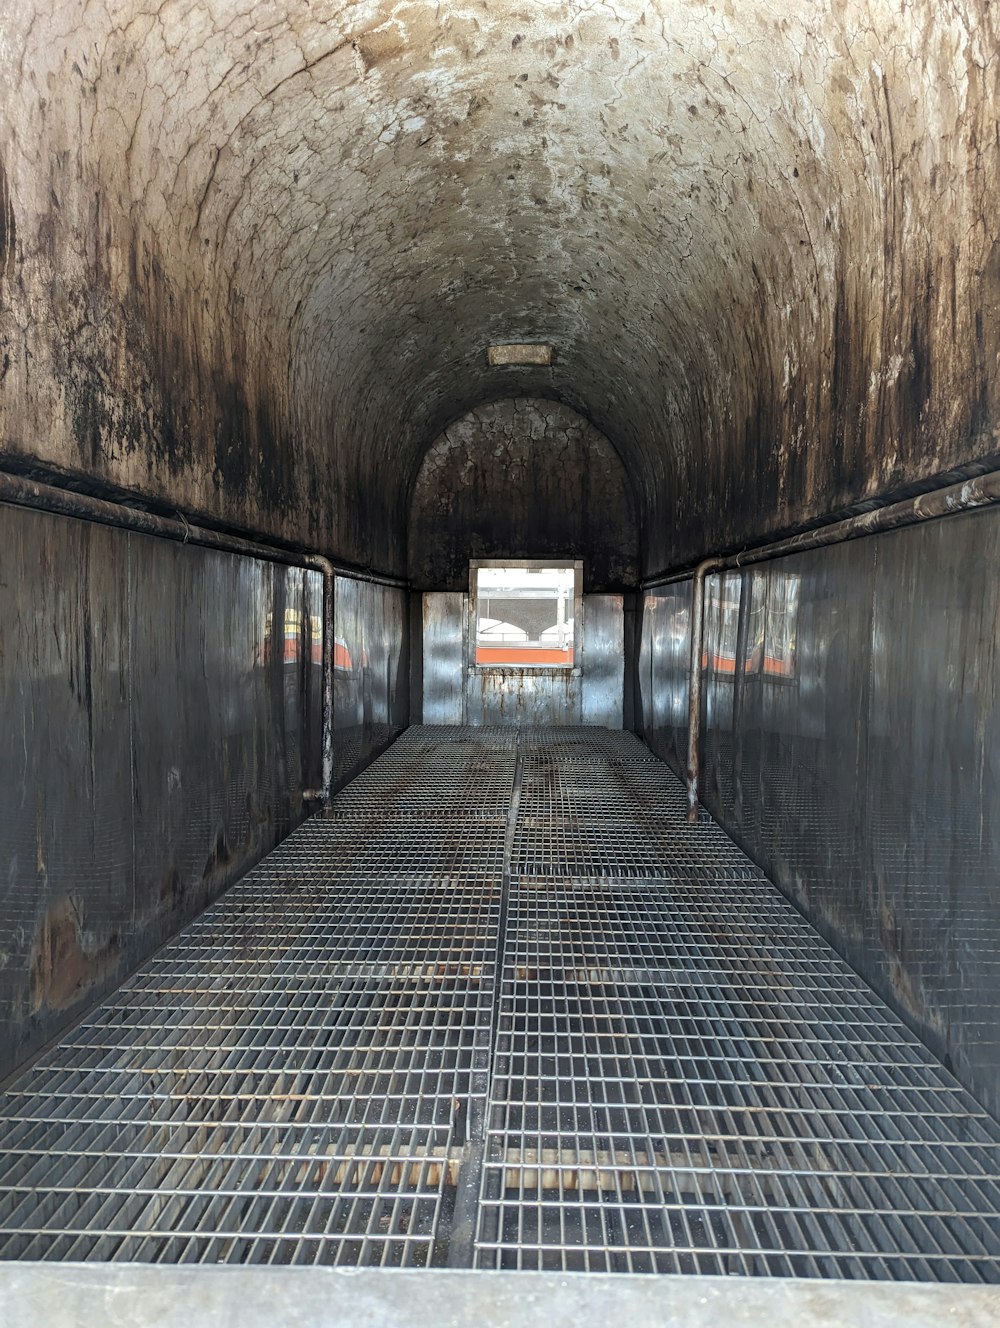 the inside of a truck with metal grates on the floor